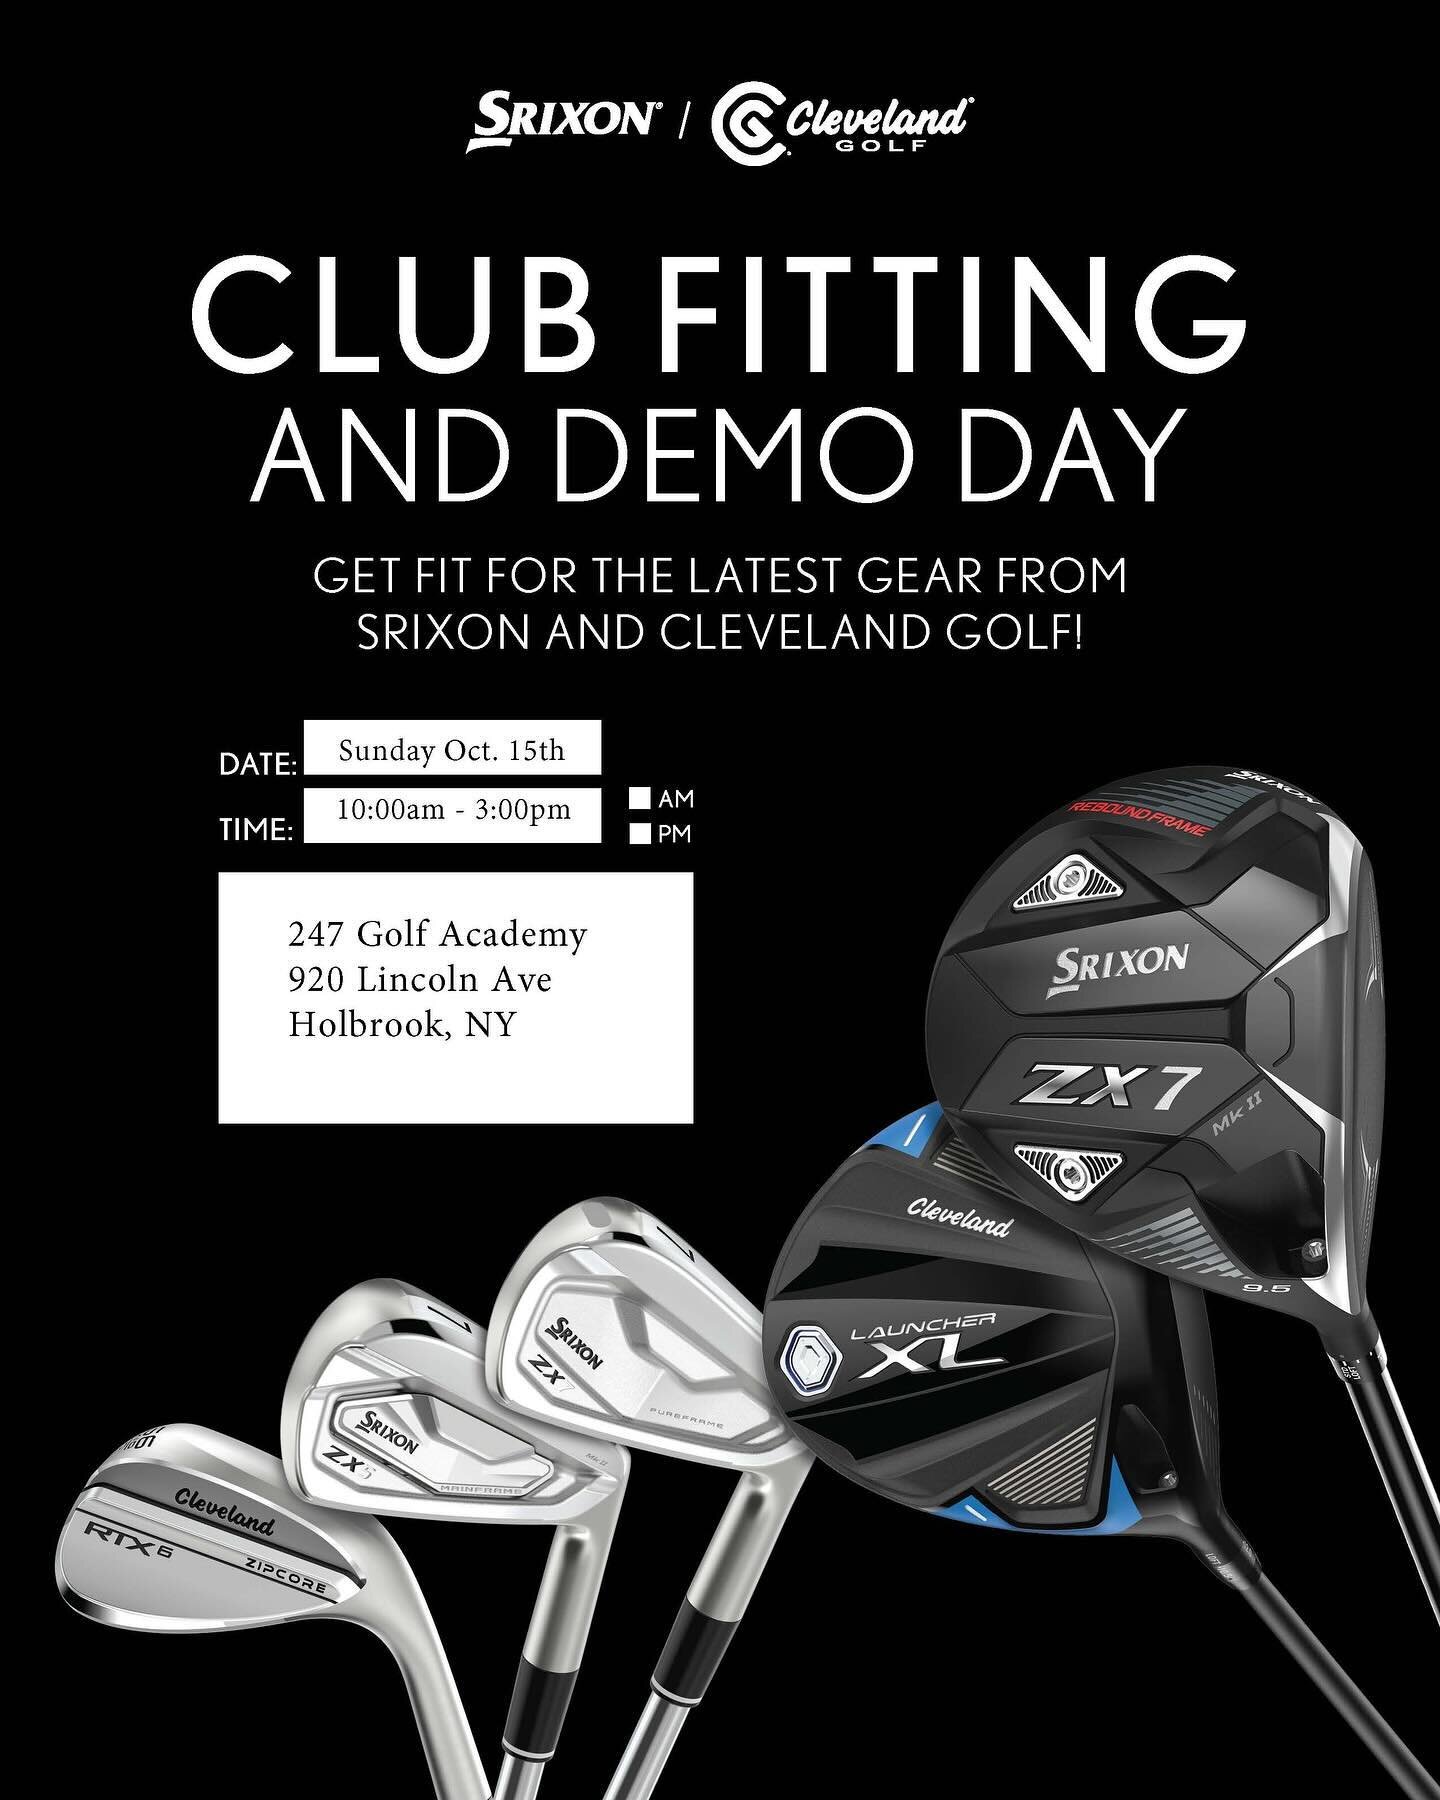 FREE Cleveland/Srixon Club fitting and demo day. This Sunday October 15th, 10am-3pm. 30 minute sessions available to book online through our website, send us a DM or call 631-319-1075. Try before you buy!